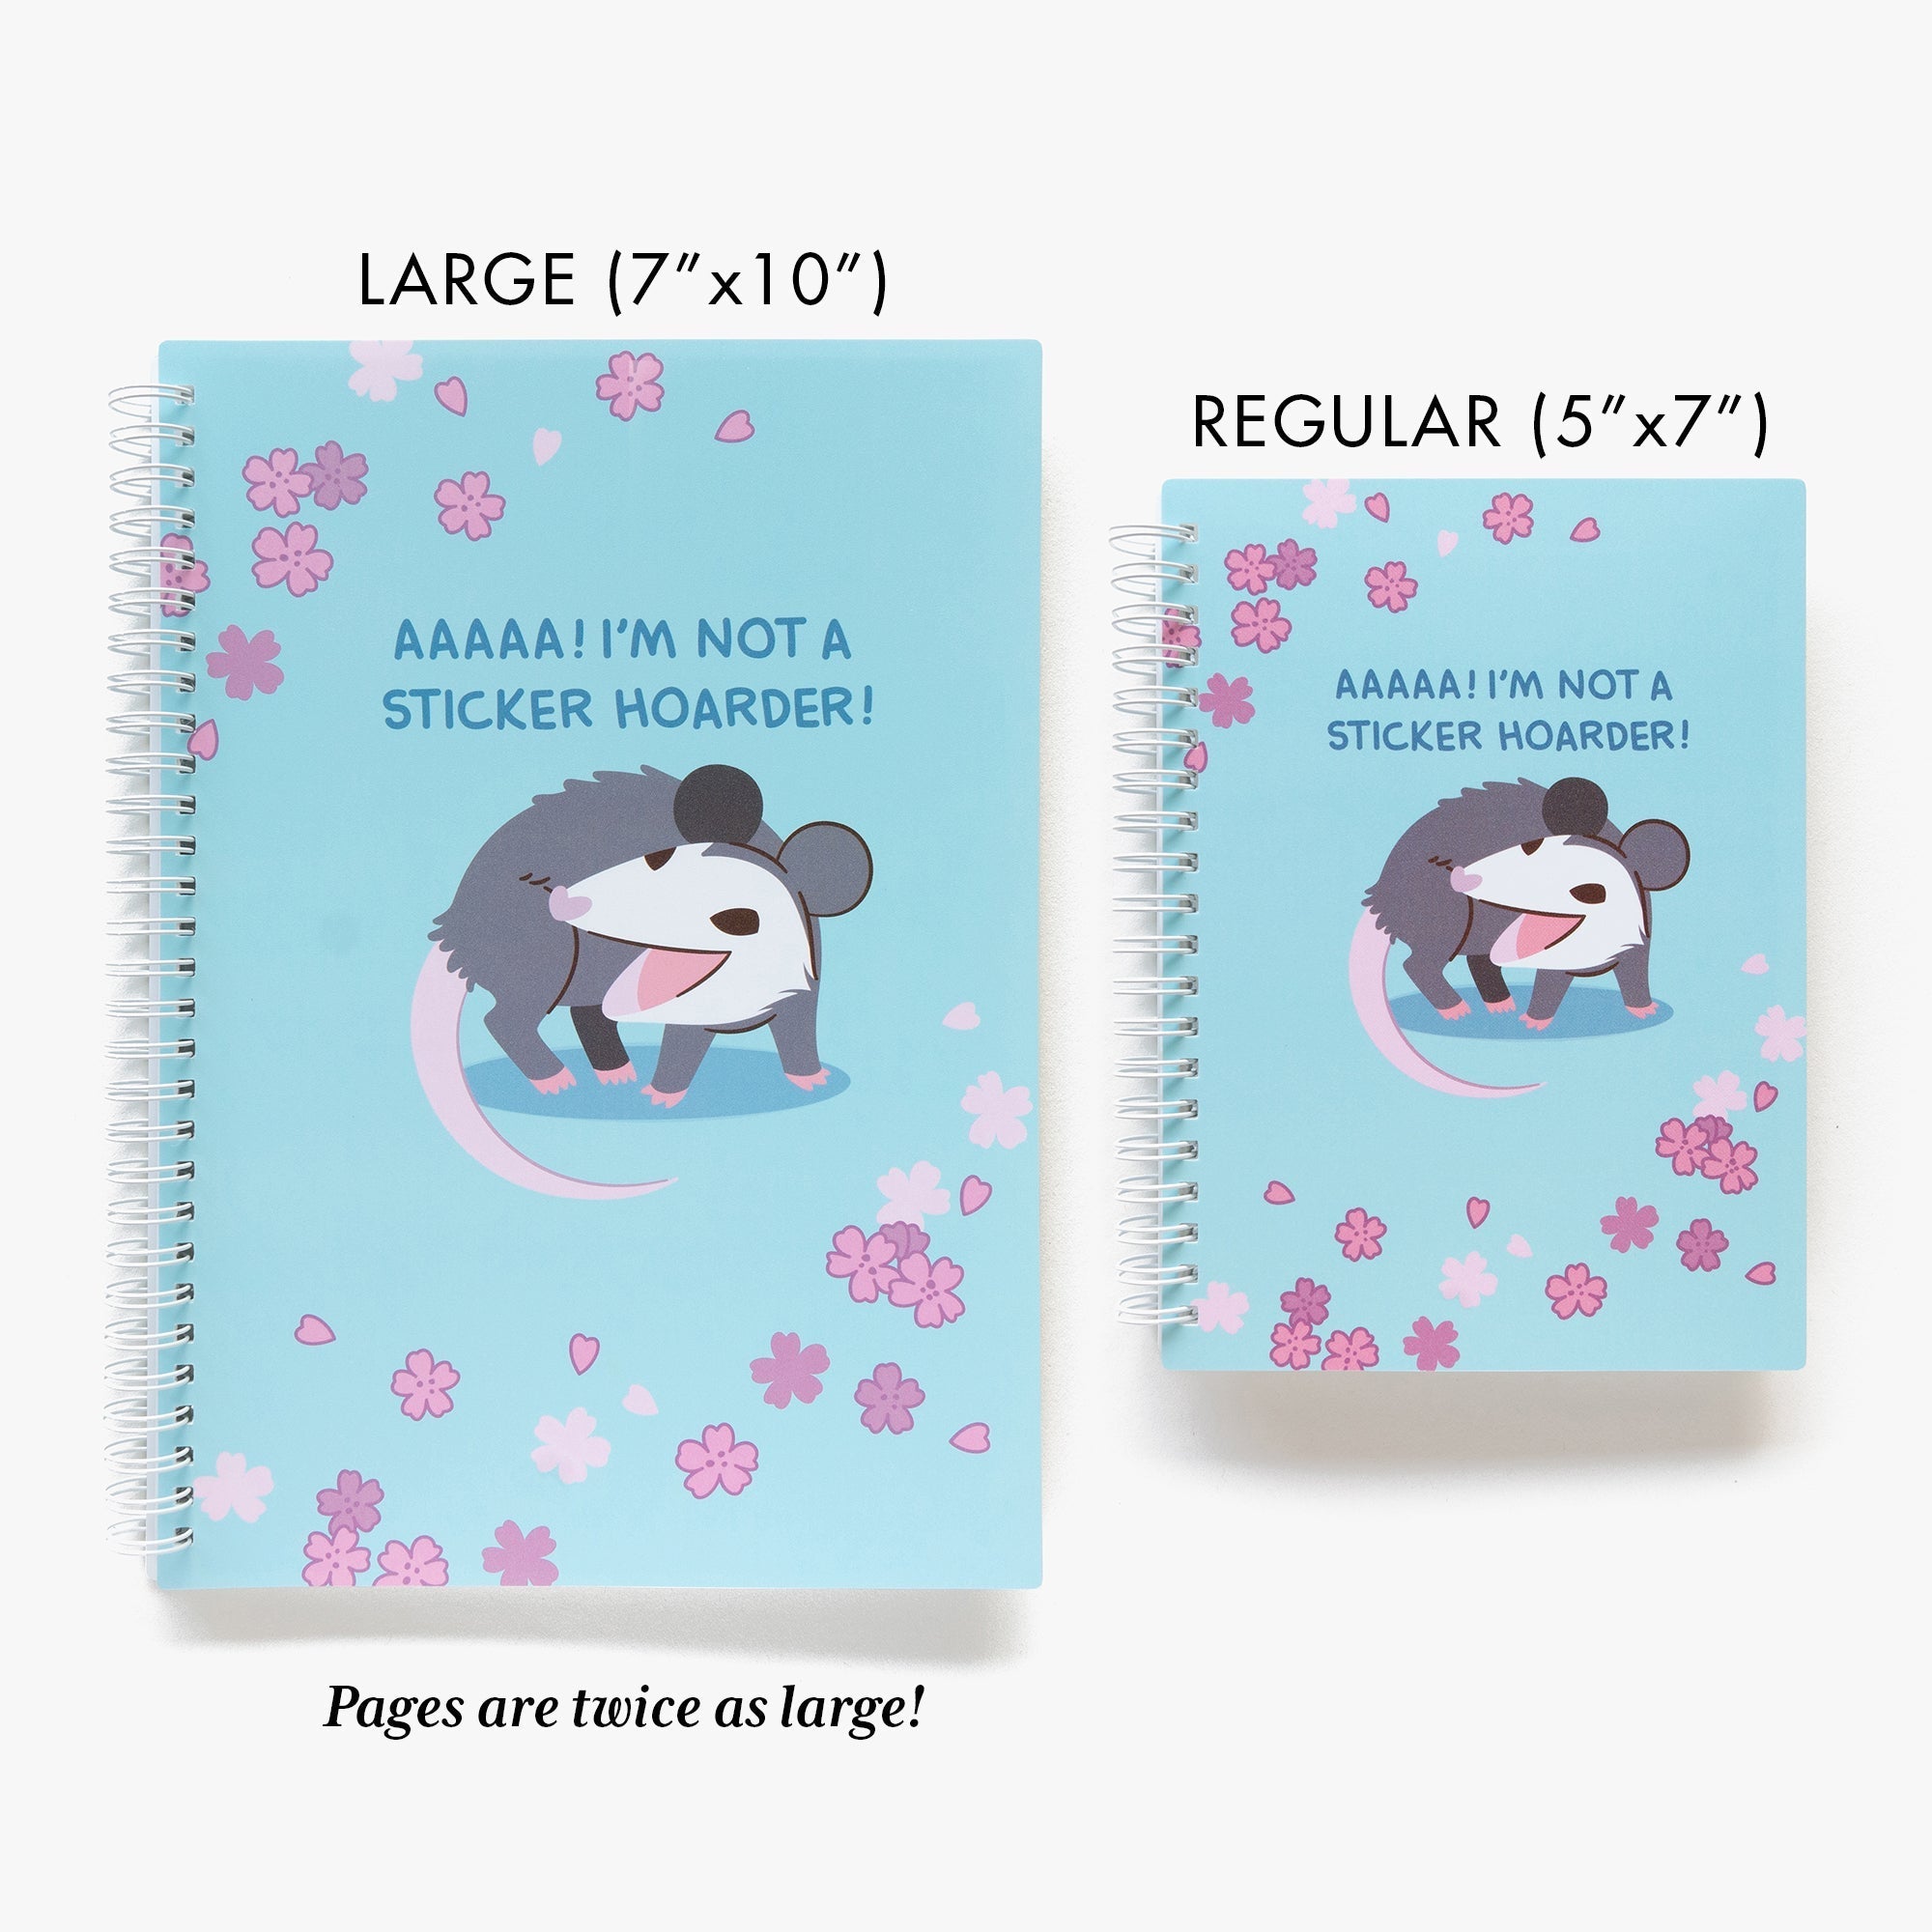 MD Heavy Breathing Cat Reusable Sticker Book